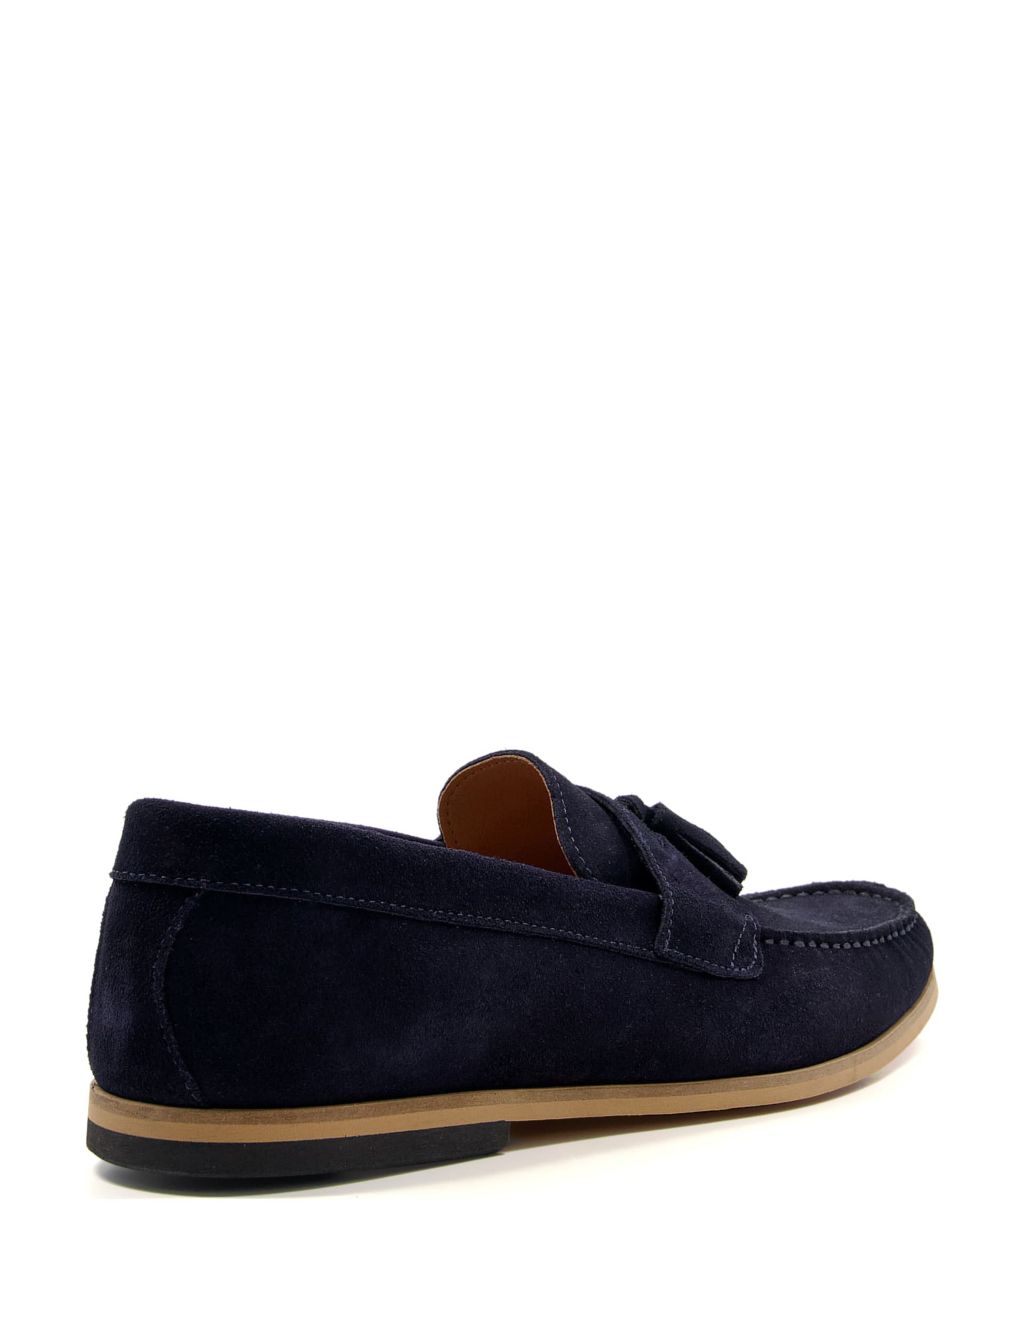 Suede Slip-On Loafers image 4